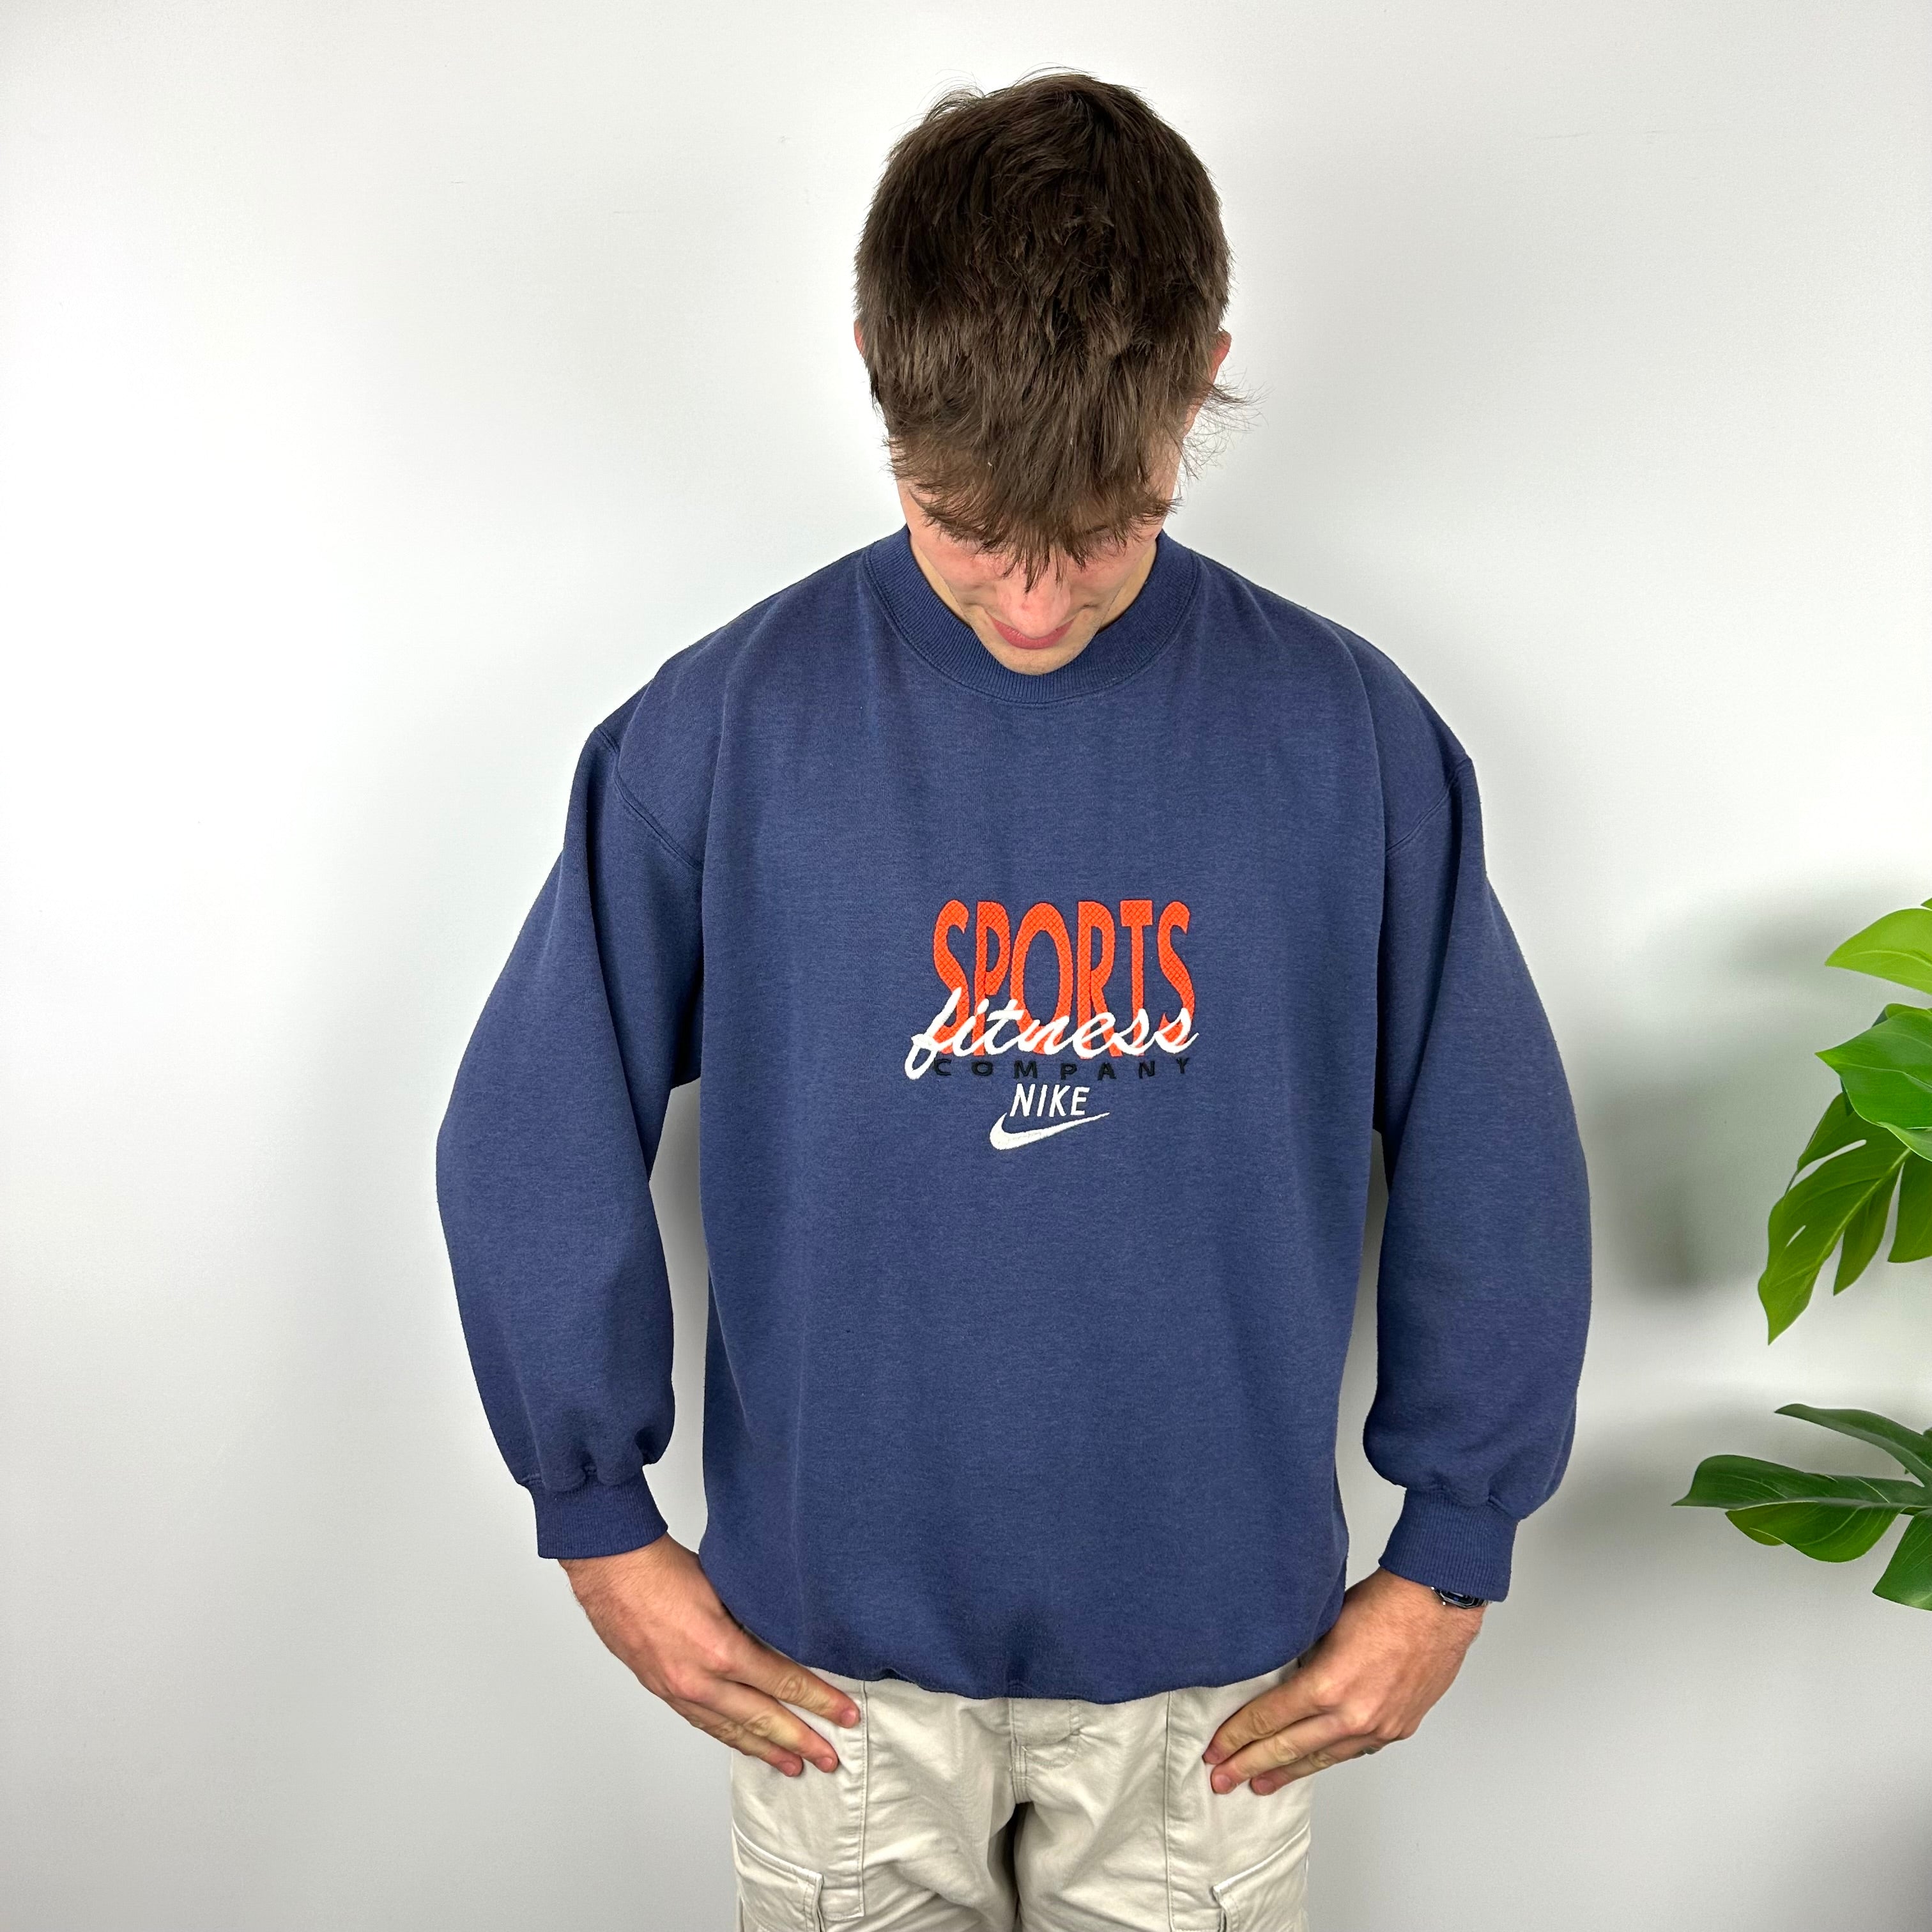 Nike Sports & Fitness Navy Embroidered Spell Out Sweatshirt (L)